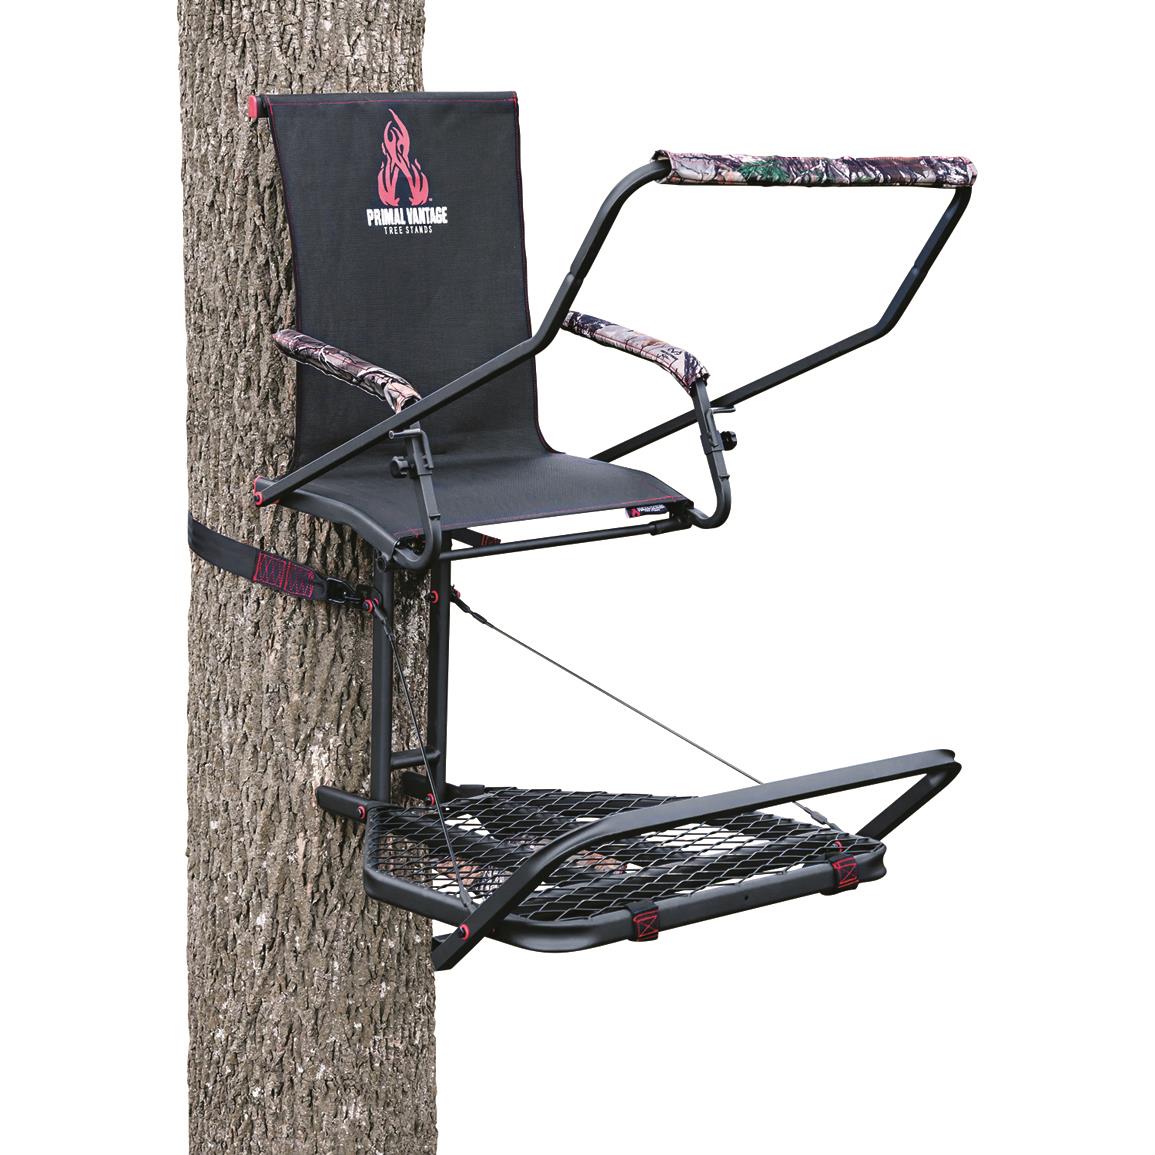 Tree Stand Seat Hunting Armrest Deluxe Padded Sturdy Steel Frame 300 LB 